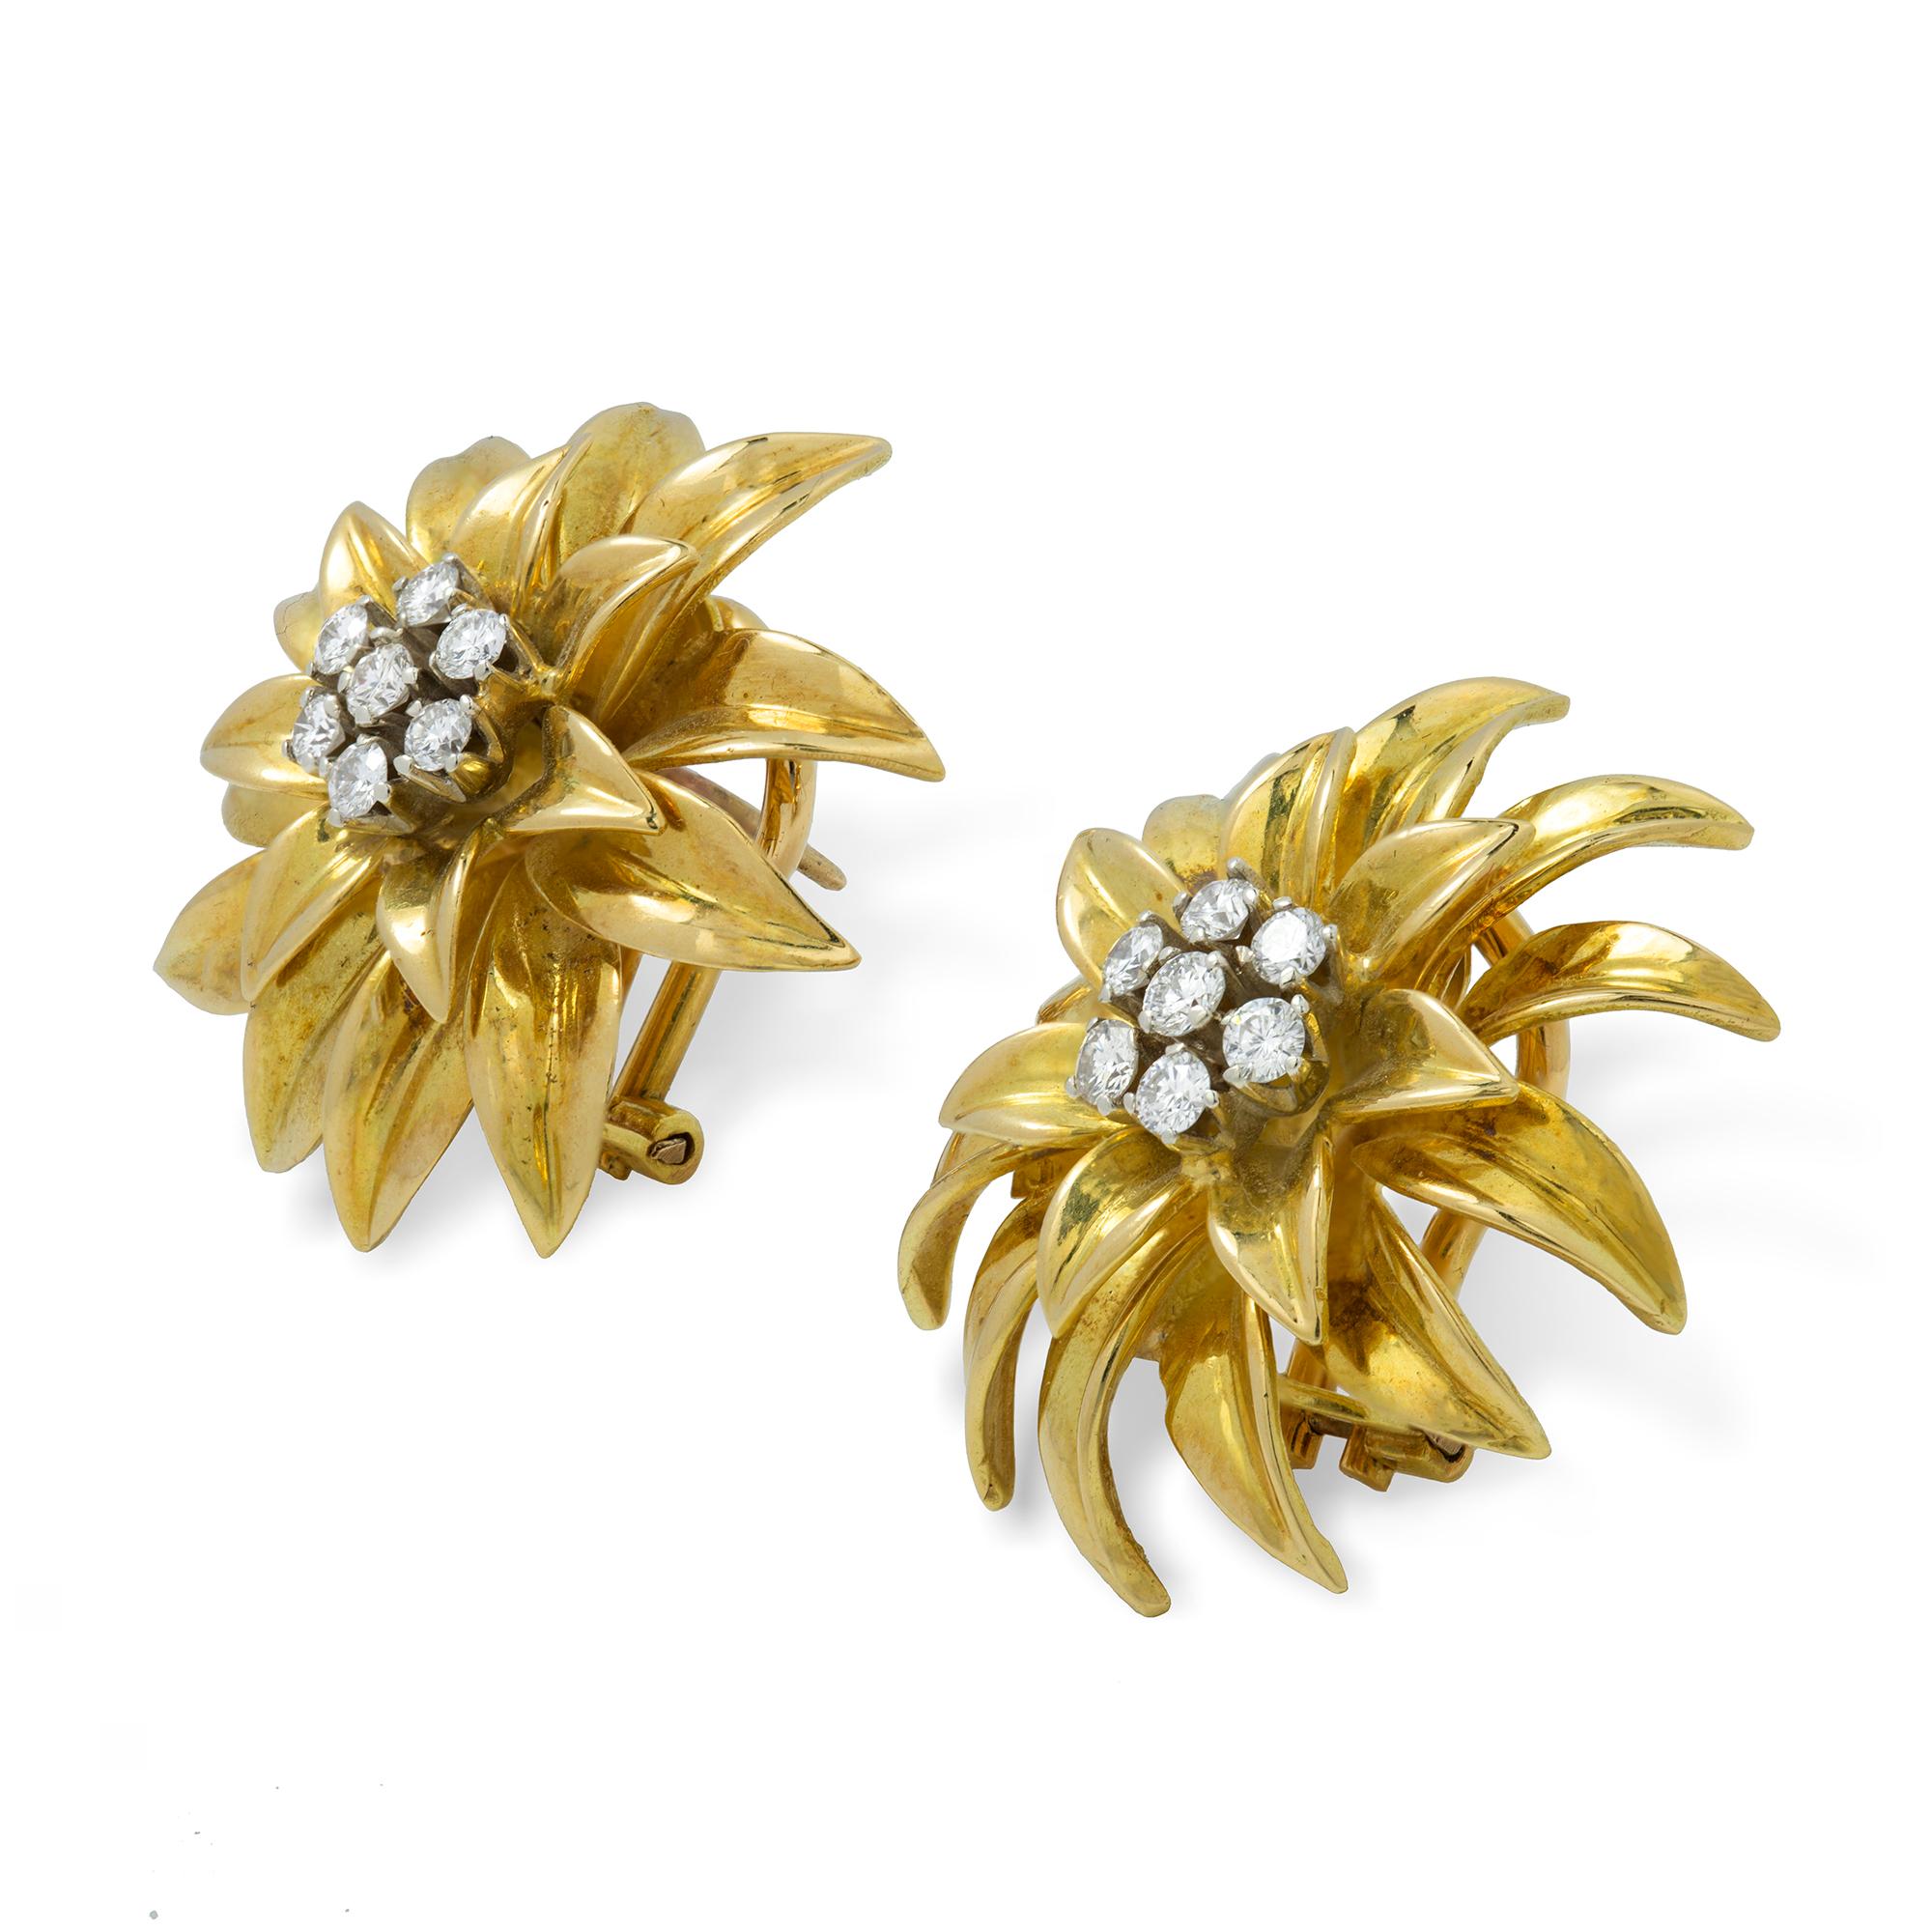 A pair of Tiffany & Co gold earrings, in the form of a gold chrysanthemum each set with seven round brilliant-cut diamonds to the centre, signed Tiffany 18ct yellow gold, with post and clip fittings, gross weight 15.5 grams.